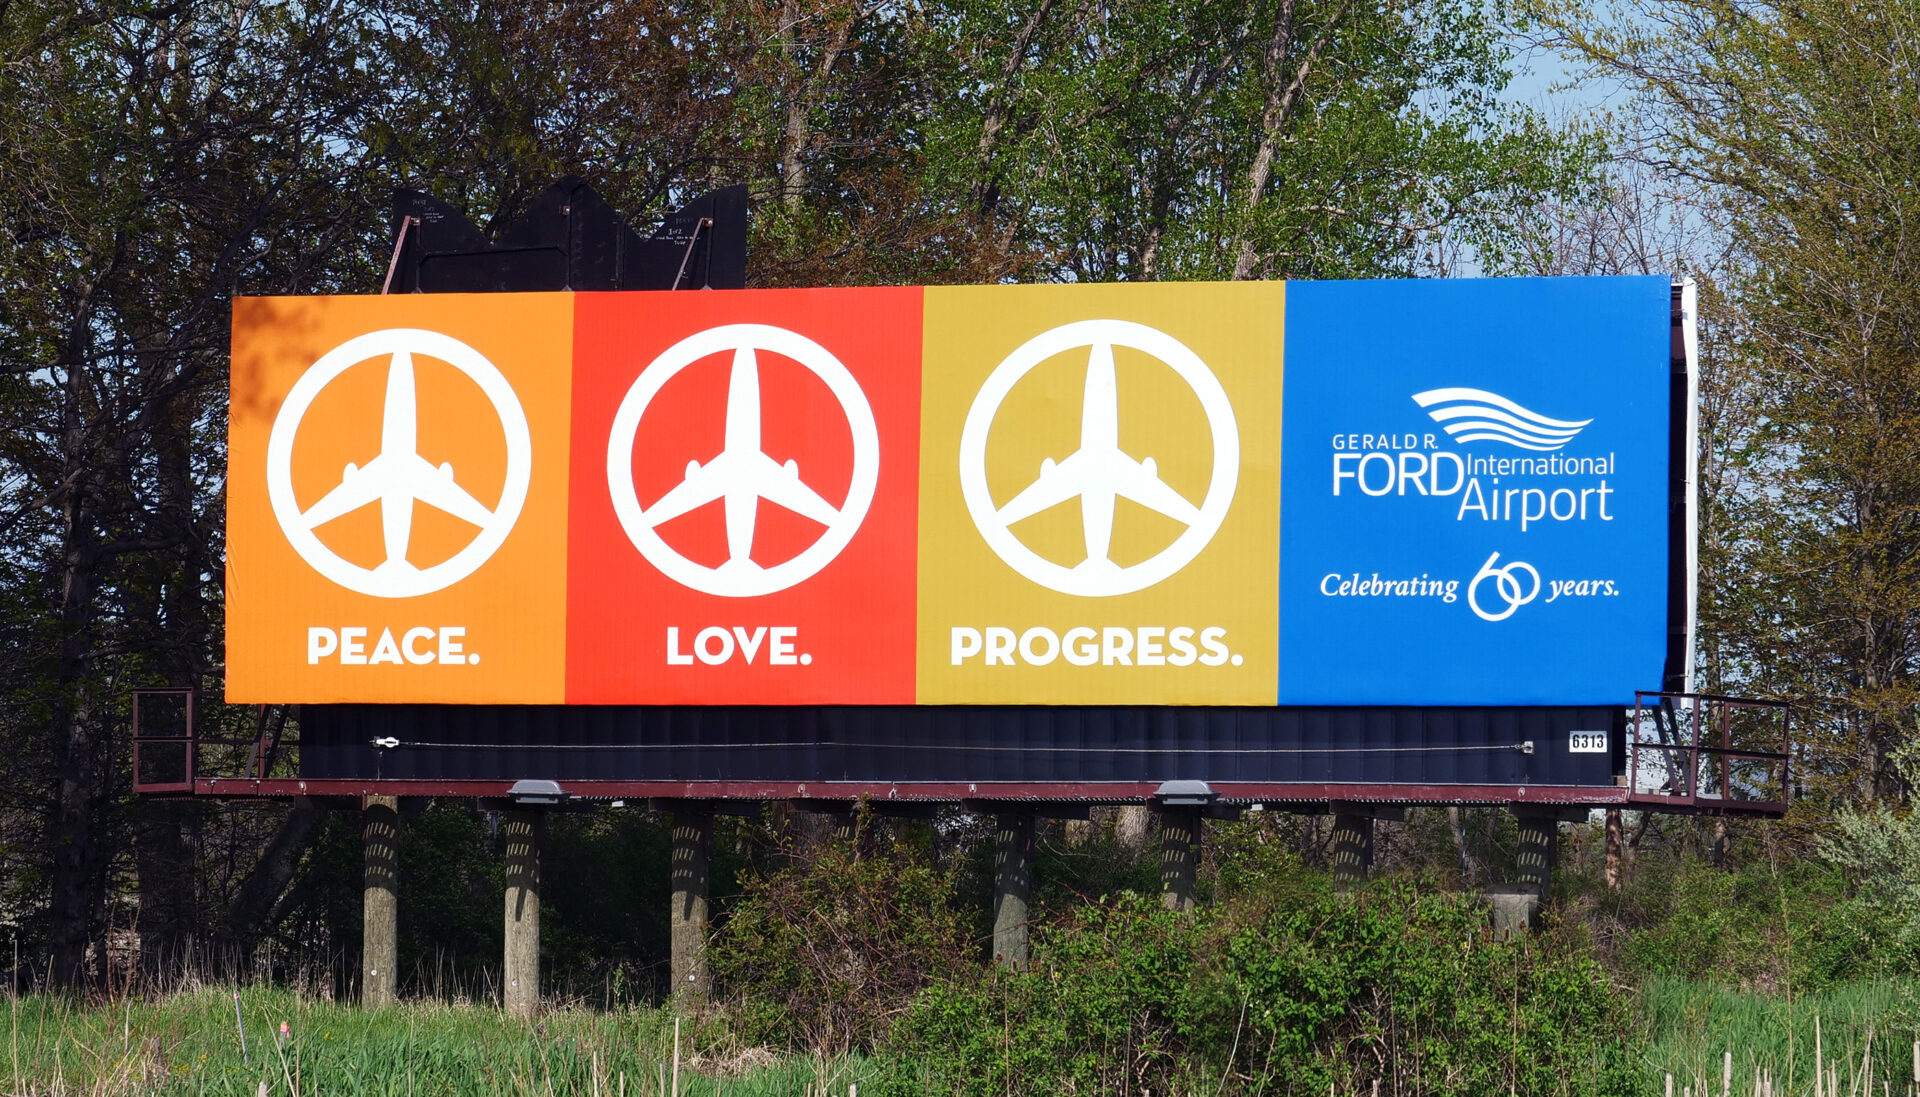 Out of home 60th anniversary campaign for Gerald R. Ford International Airport. Peace. Love. Progress.